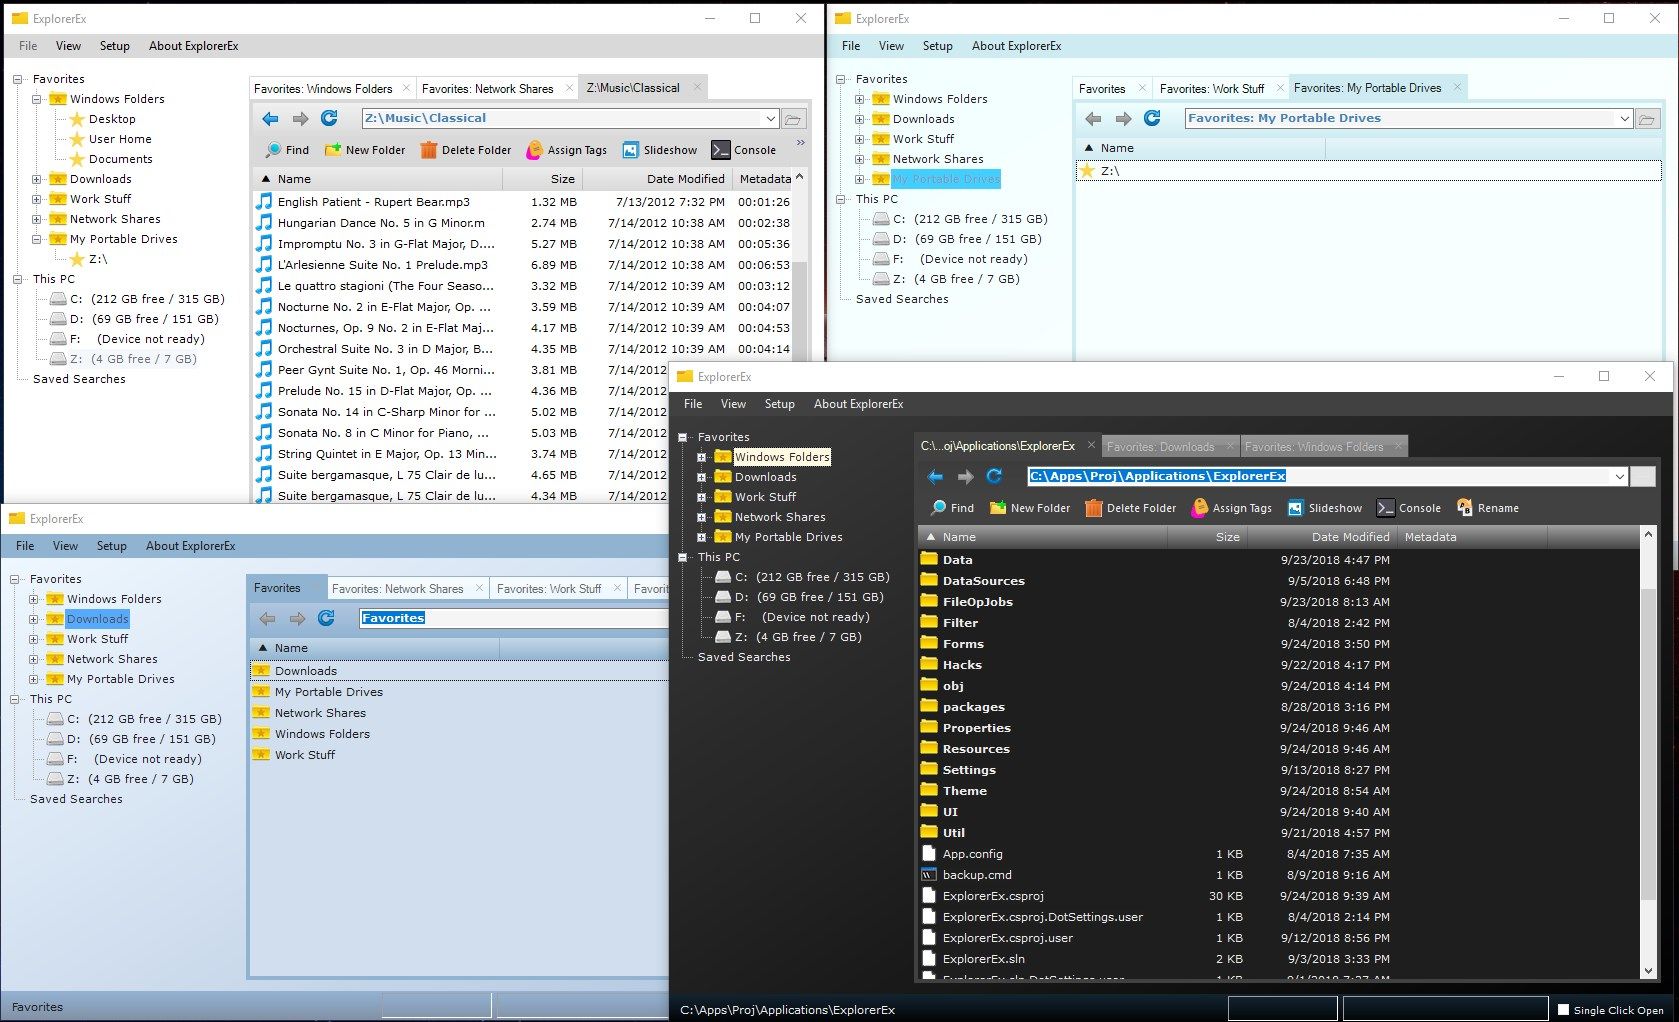 Familiar Windows File Explorer interface, but with tabs and themes (standard Windows, Dark, and two shades of blue.)  Supports drag and drop, Copy and Paste, file management, and more!